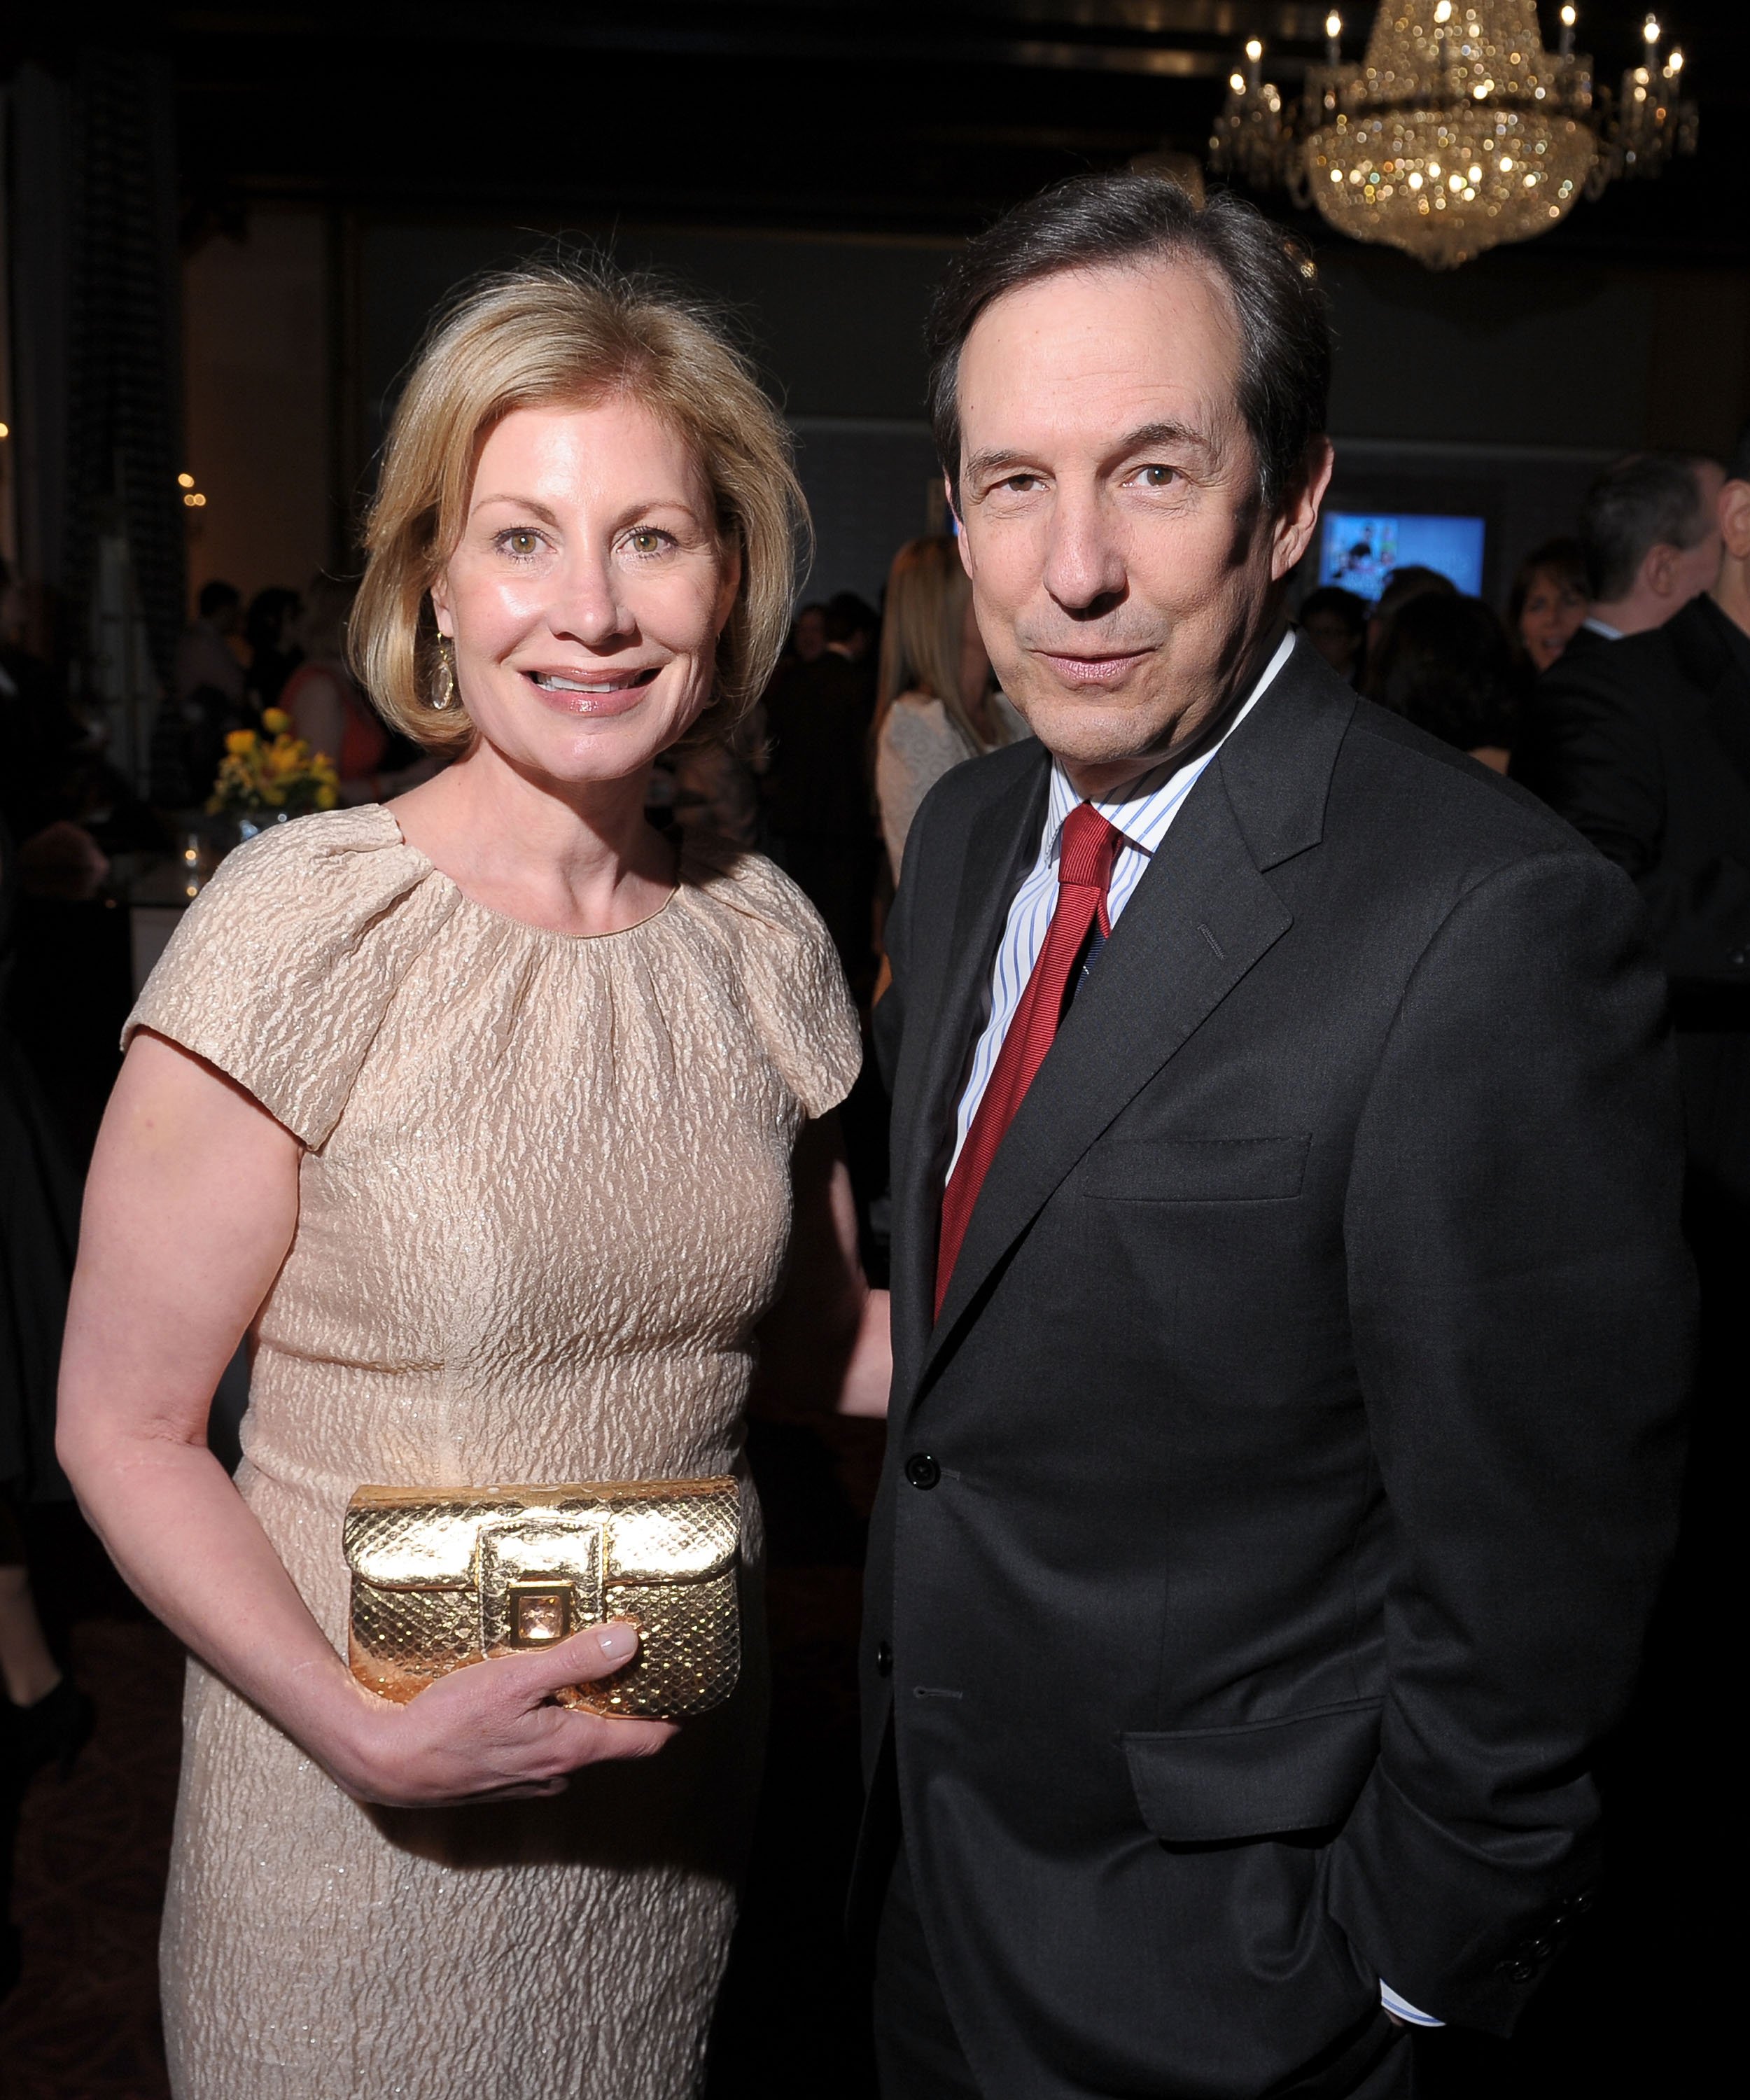 Lorraine Smothers and Chris Wallace are pictured at the PEOPLE/TIME Party on the eve of the White House Correspondents' Dinner on April 27, 2012, in Washington, DC | Source: Getty Images